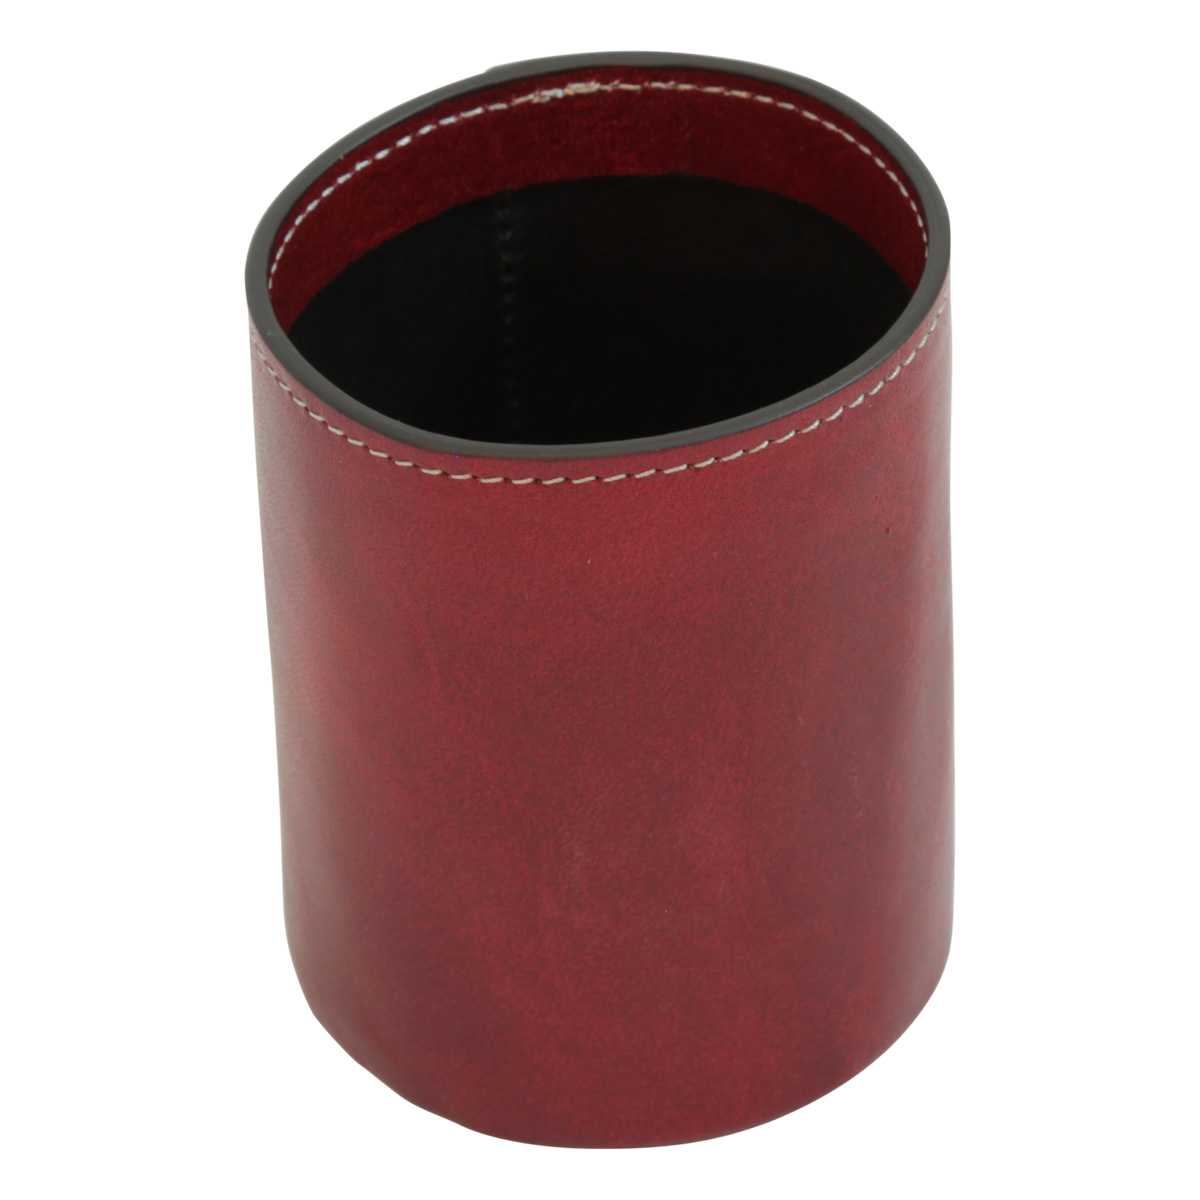 Leather pen cup - red | 763089RO | EURO | Old Angler Firenze